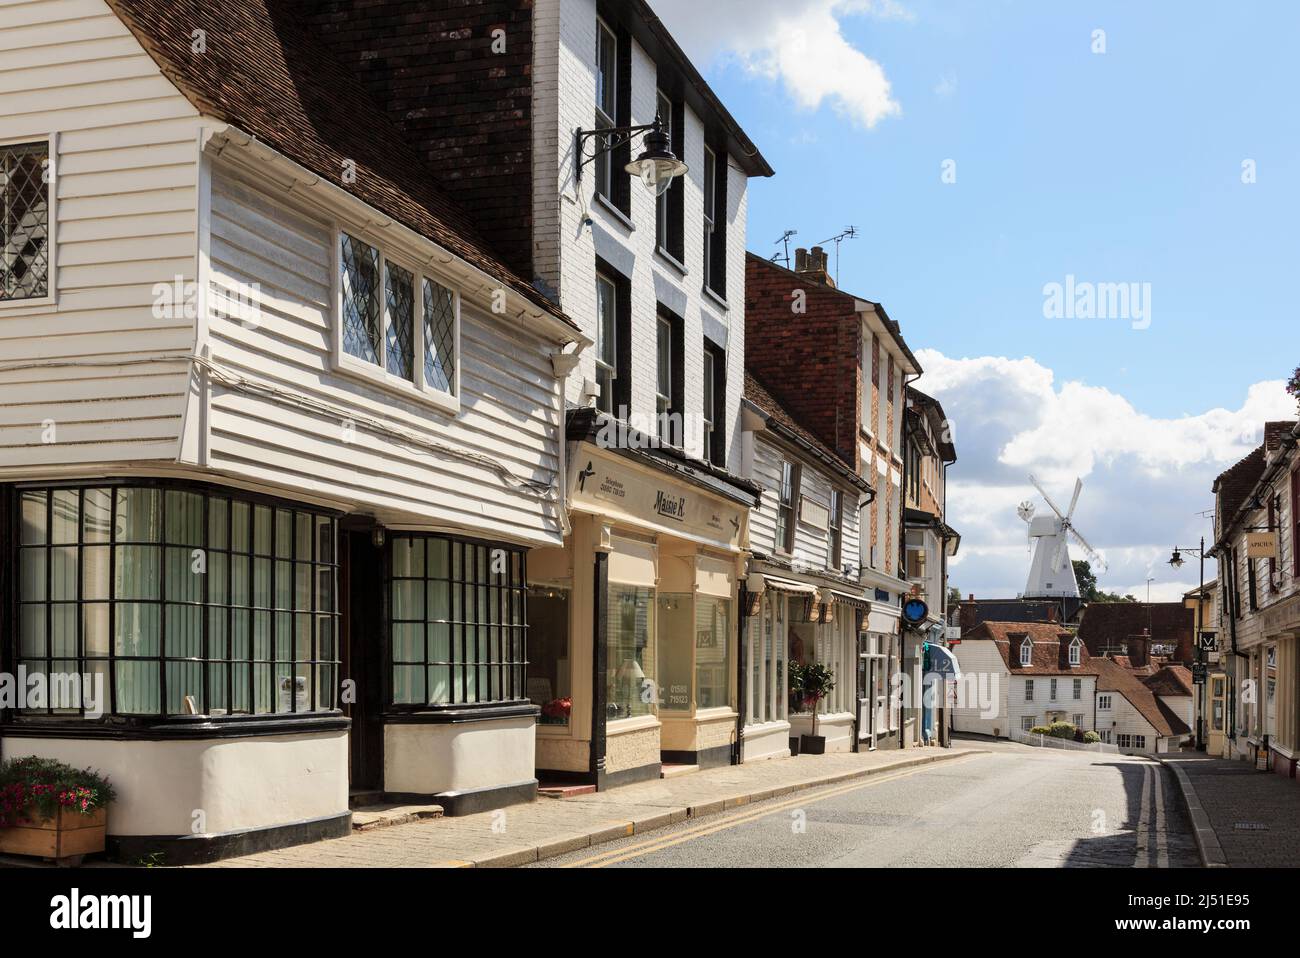 Street scene with typical old Kentish buildings and view to Union windmill in Wealden village. Stone Street, Cranbrook, Kent, England, UK, Britain Stock Photo